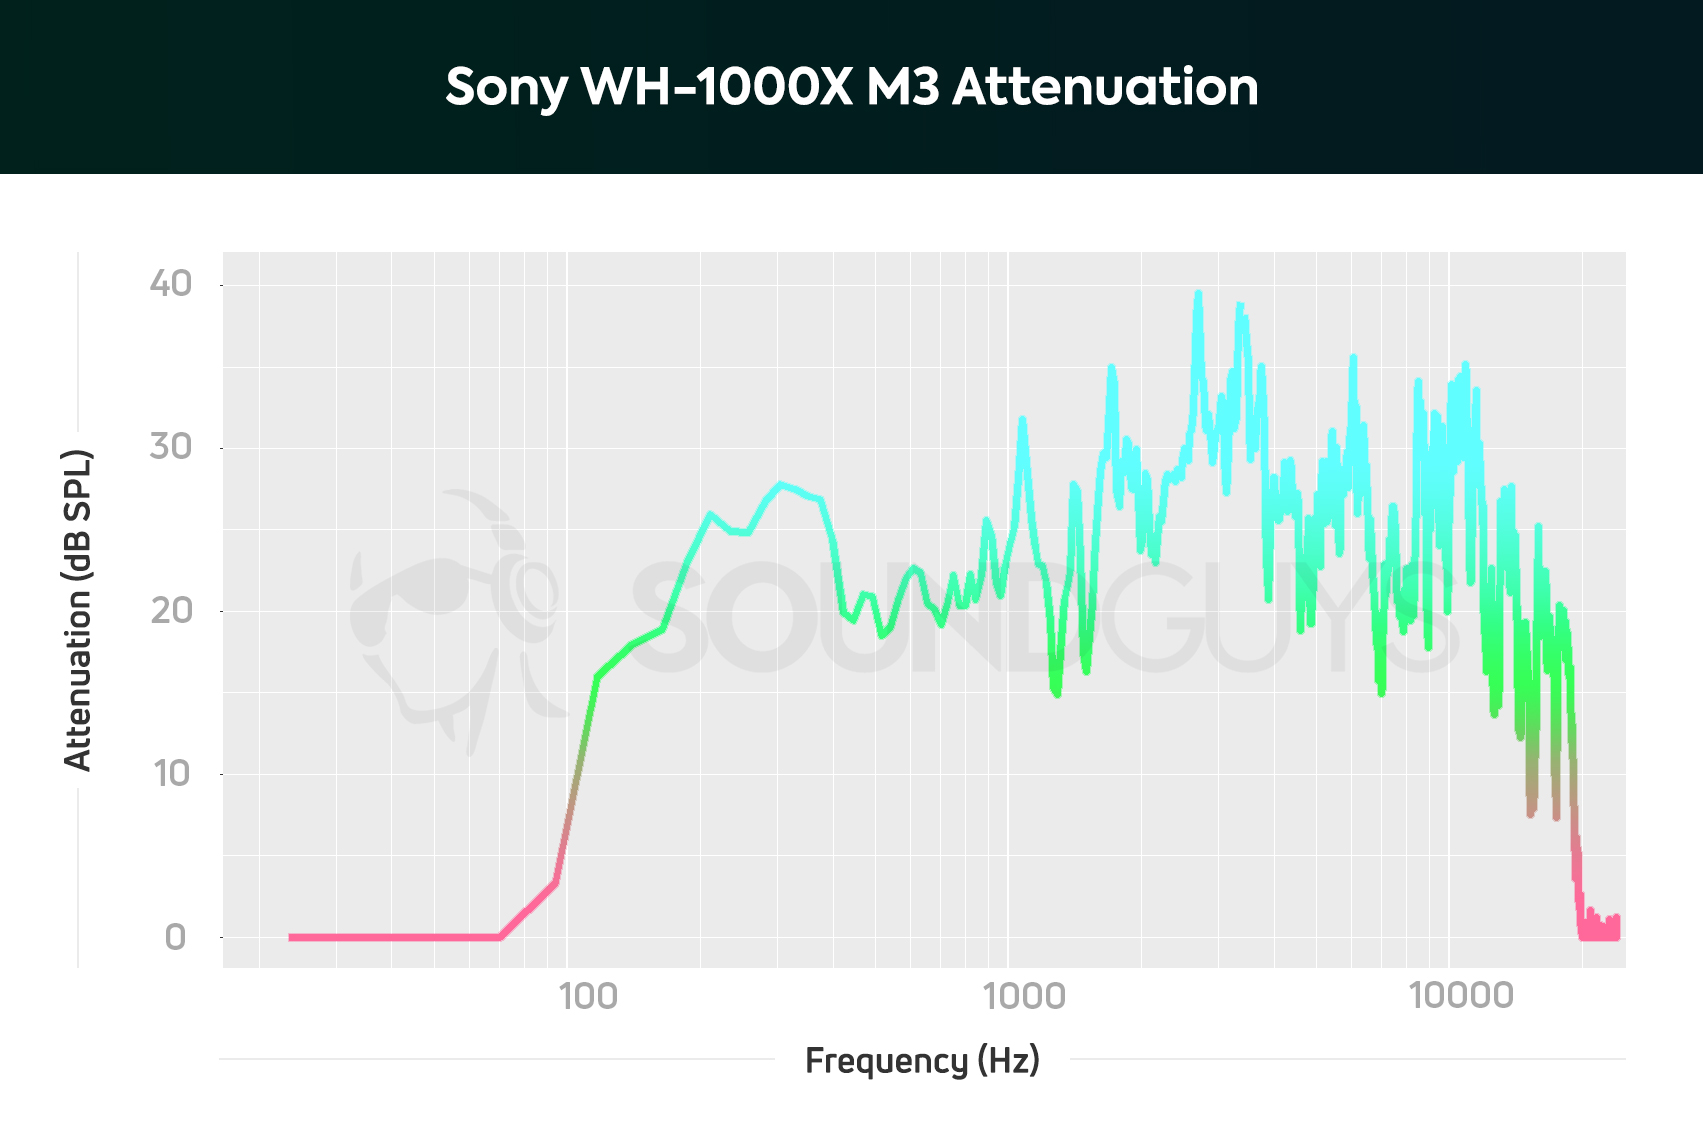 A chart detailing the noise canceling performance of the Sony WH-1000XM3 showing a much higher cancellation between 100Hz - 1000Hz when compared to the Bose headphones.